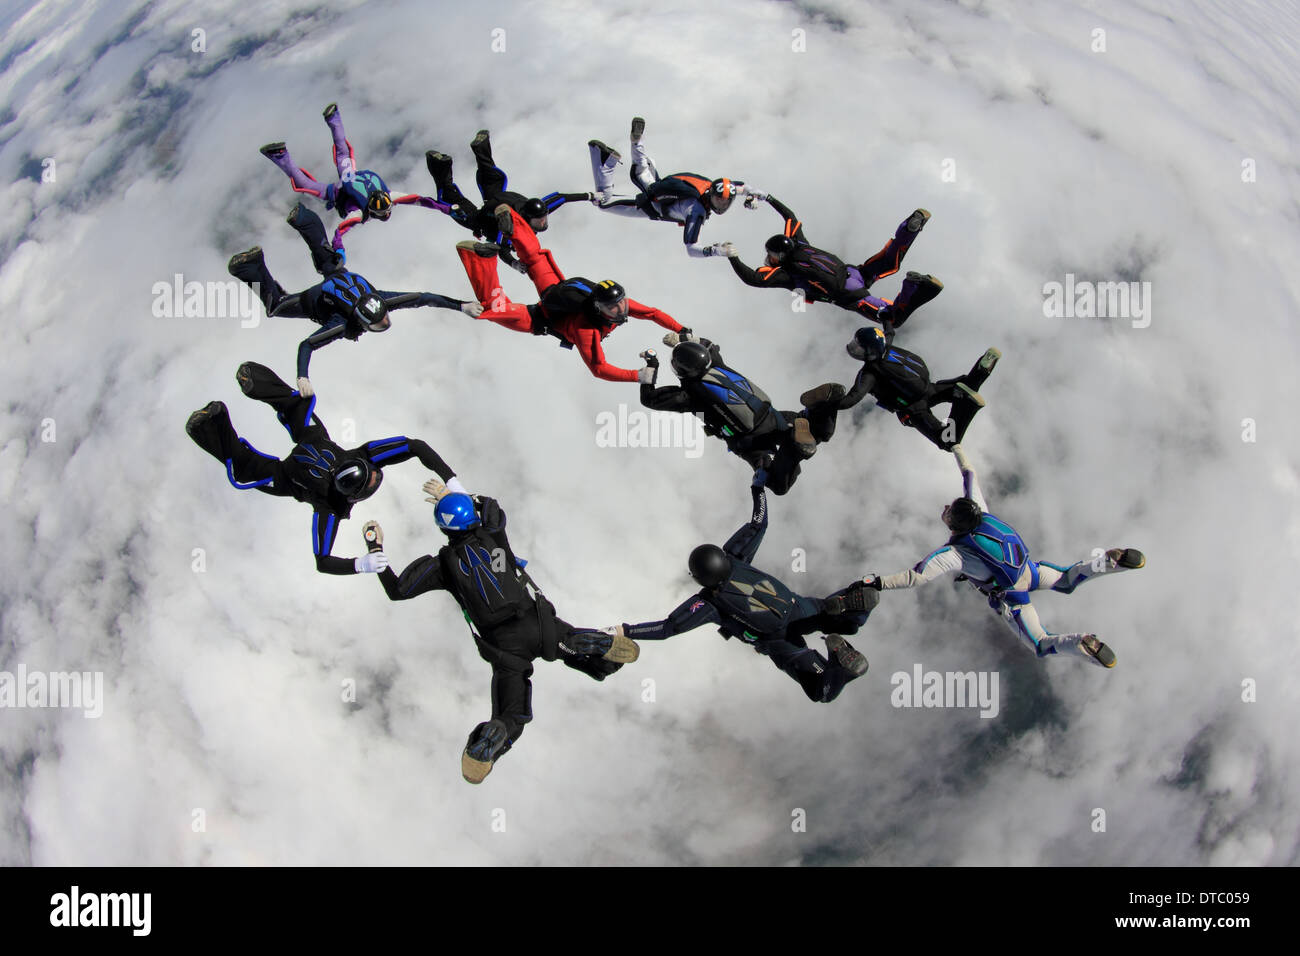 12 person skydiving formation Stock Photo - Alamy